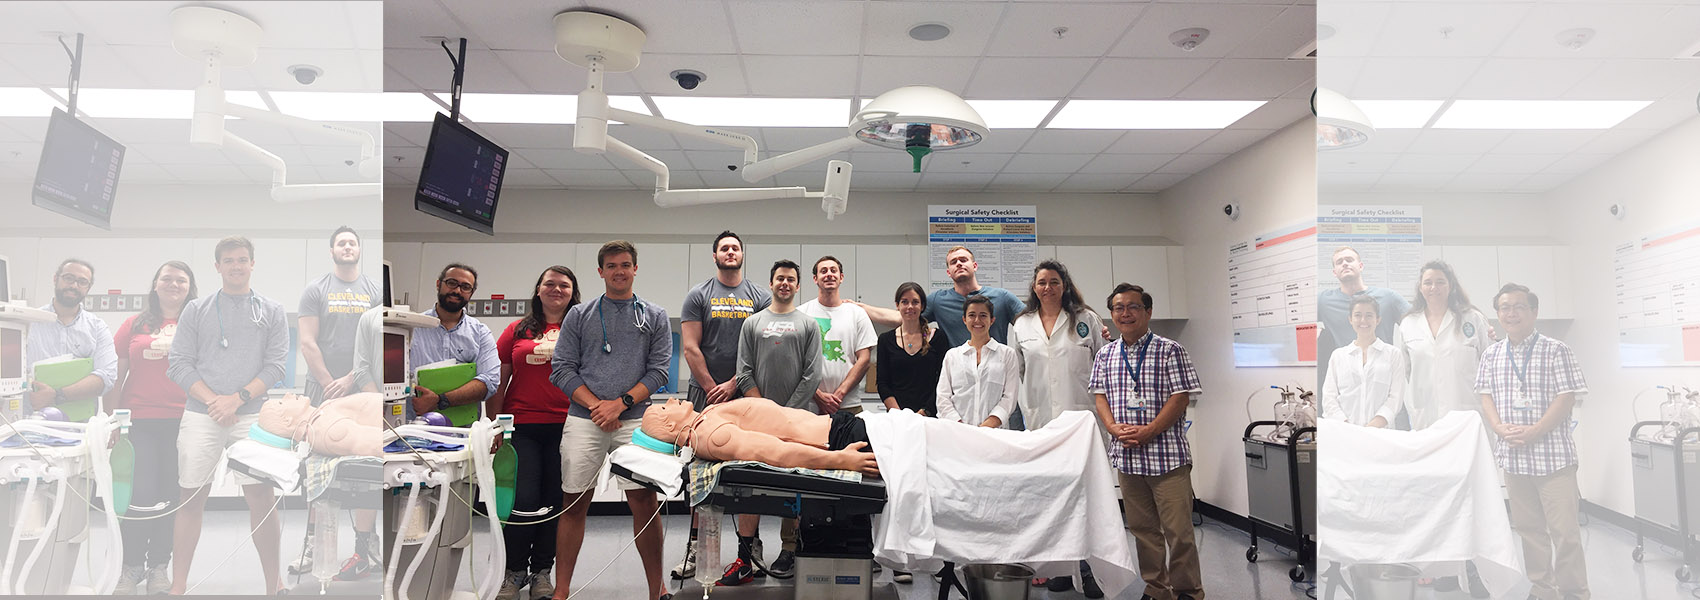 Masters Physiology Class with dummy patient